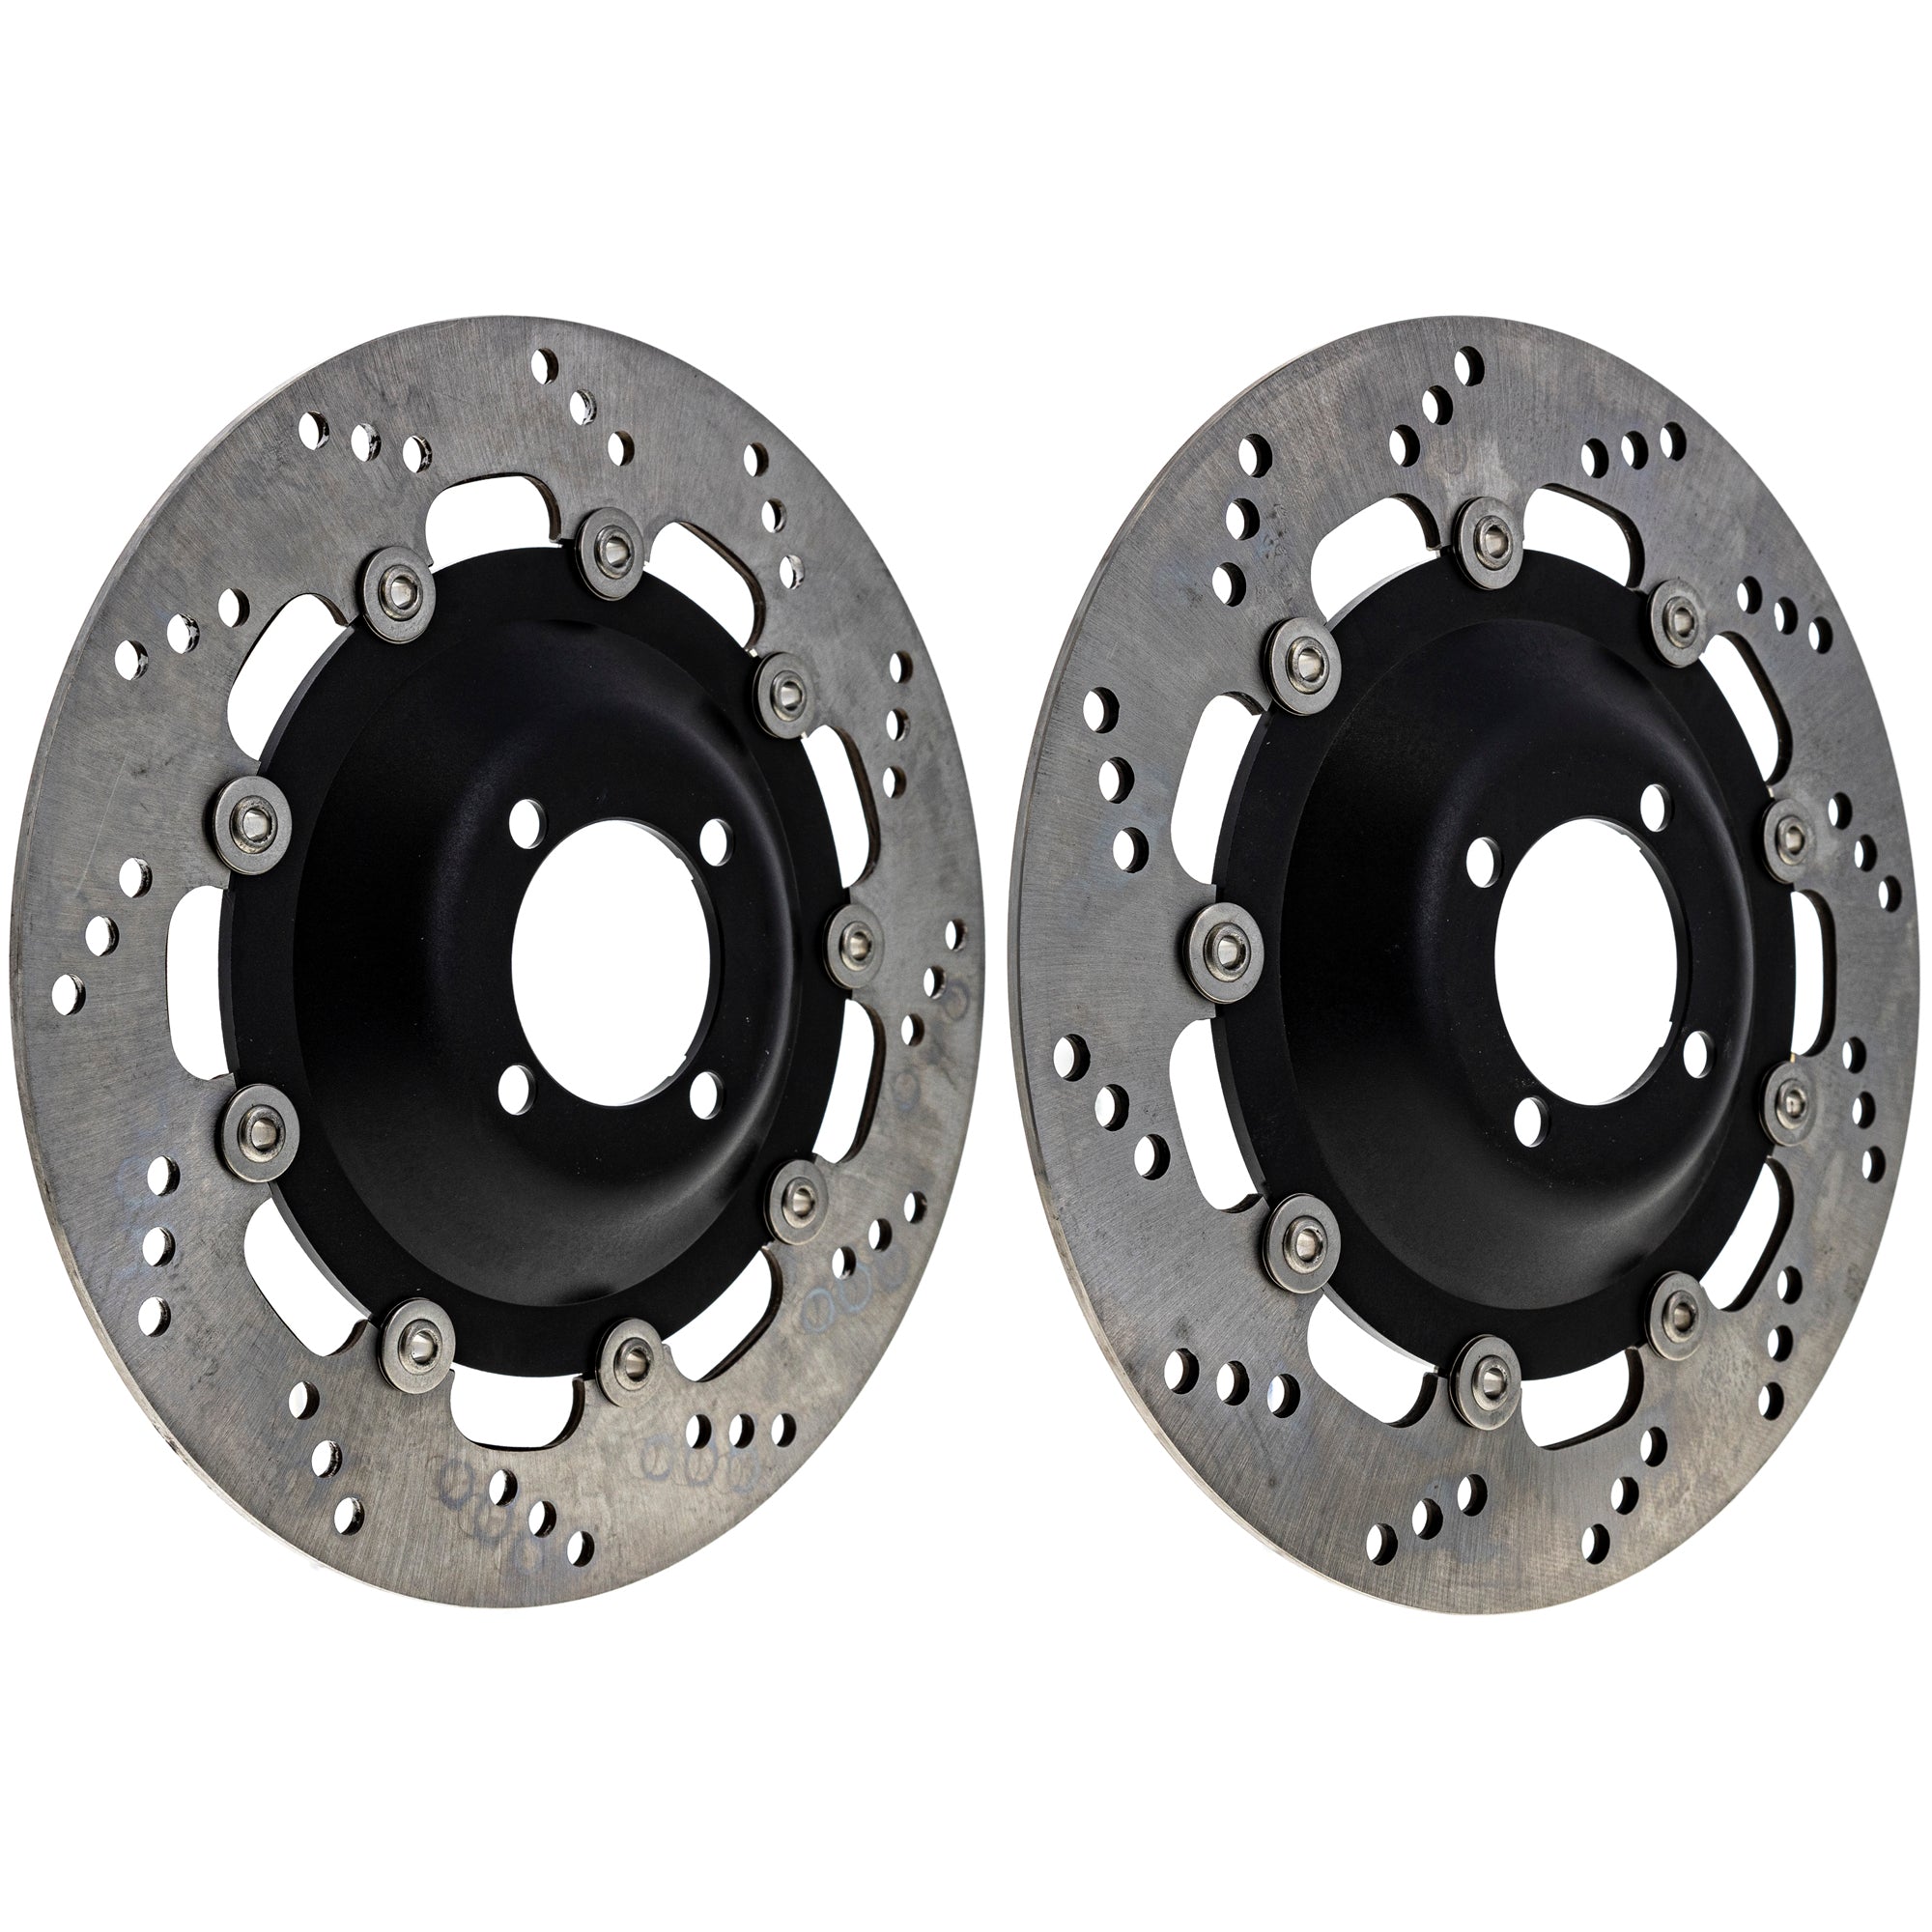 Front Brake Rotors and Pads Kit for zOTHER Polaris R80 R65 R100RT R100RS NICHE MK1006886